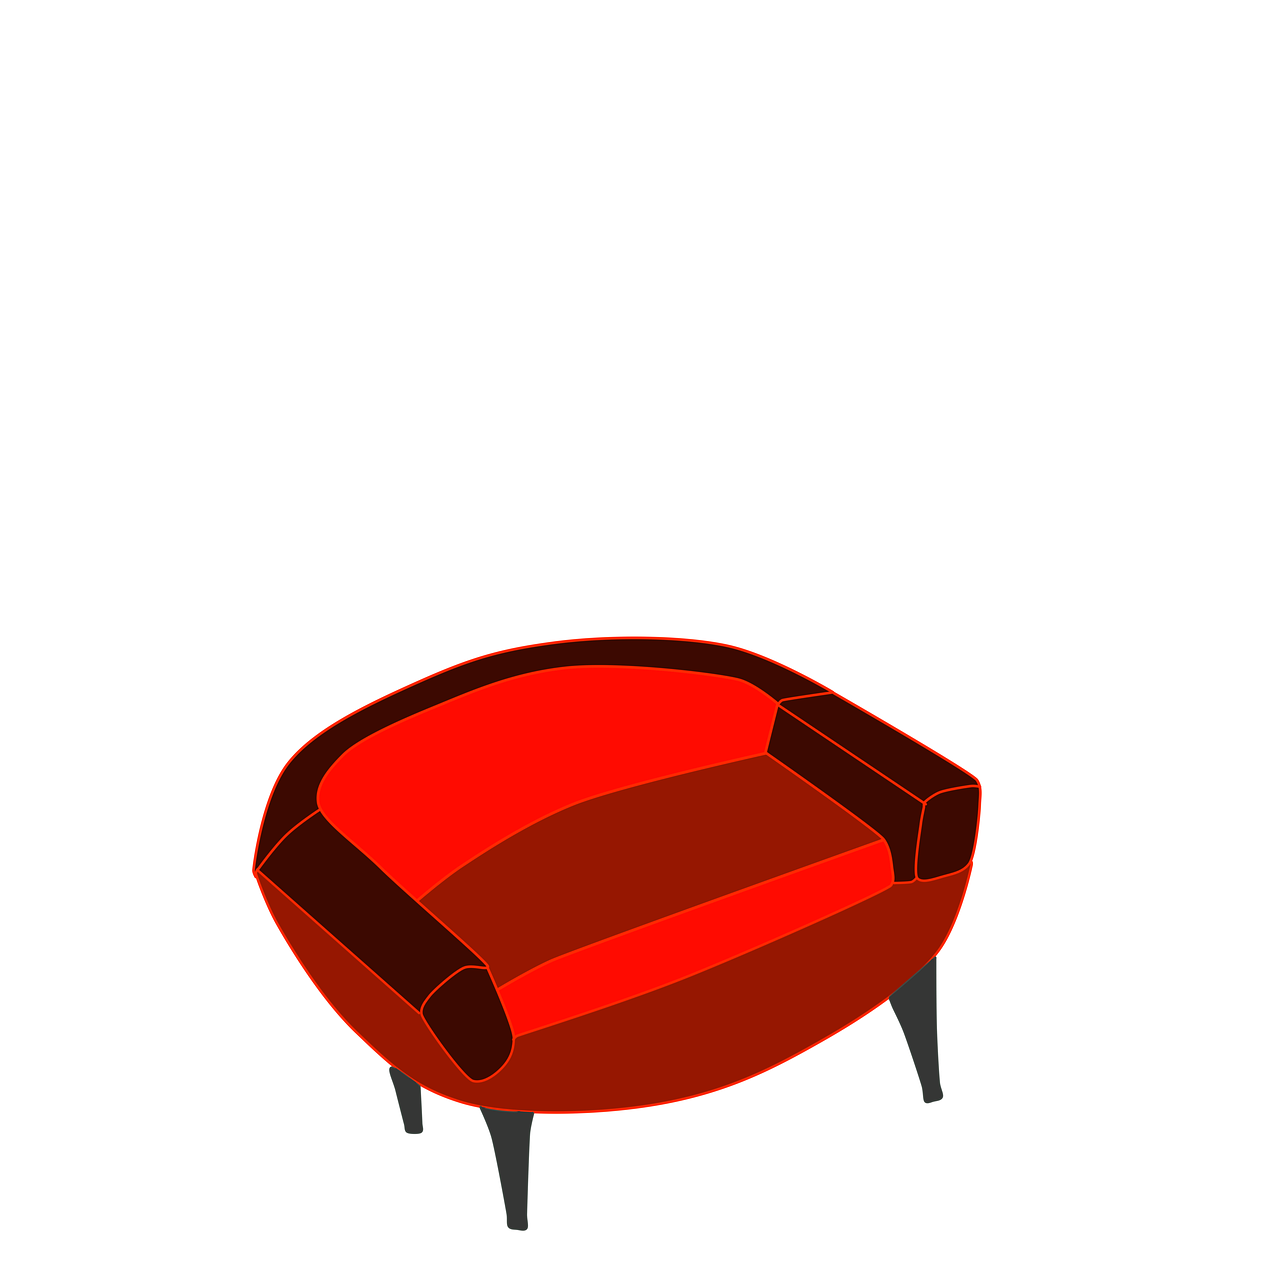 armchair red illustration free photo